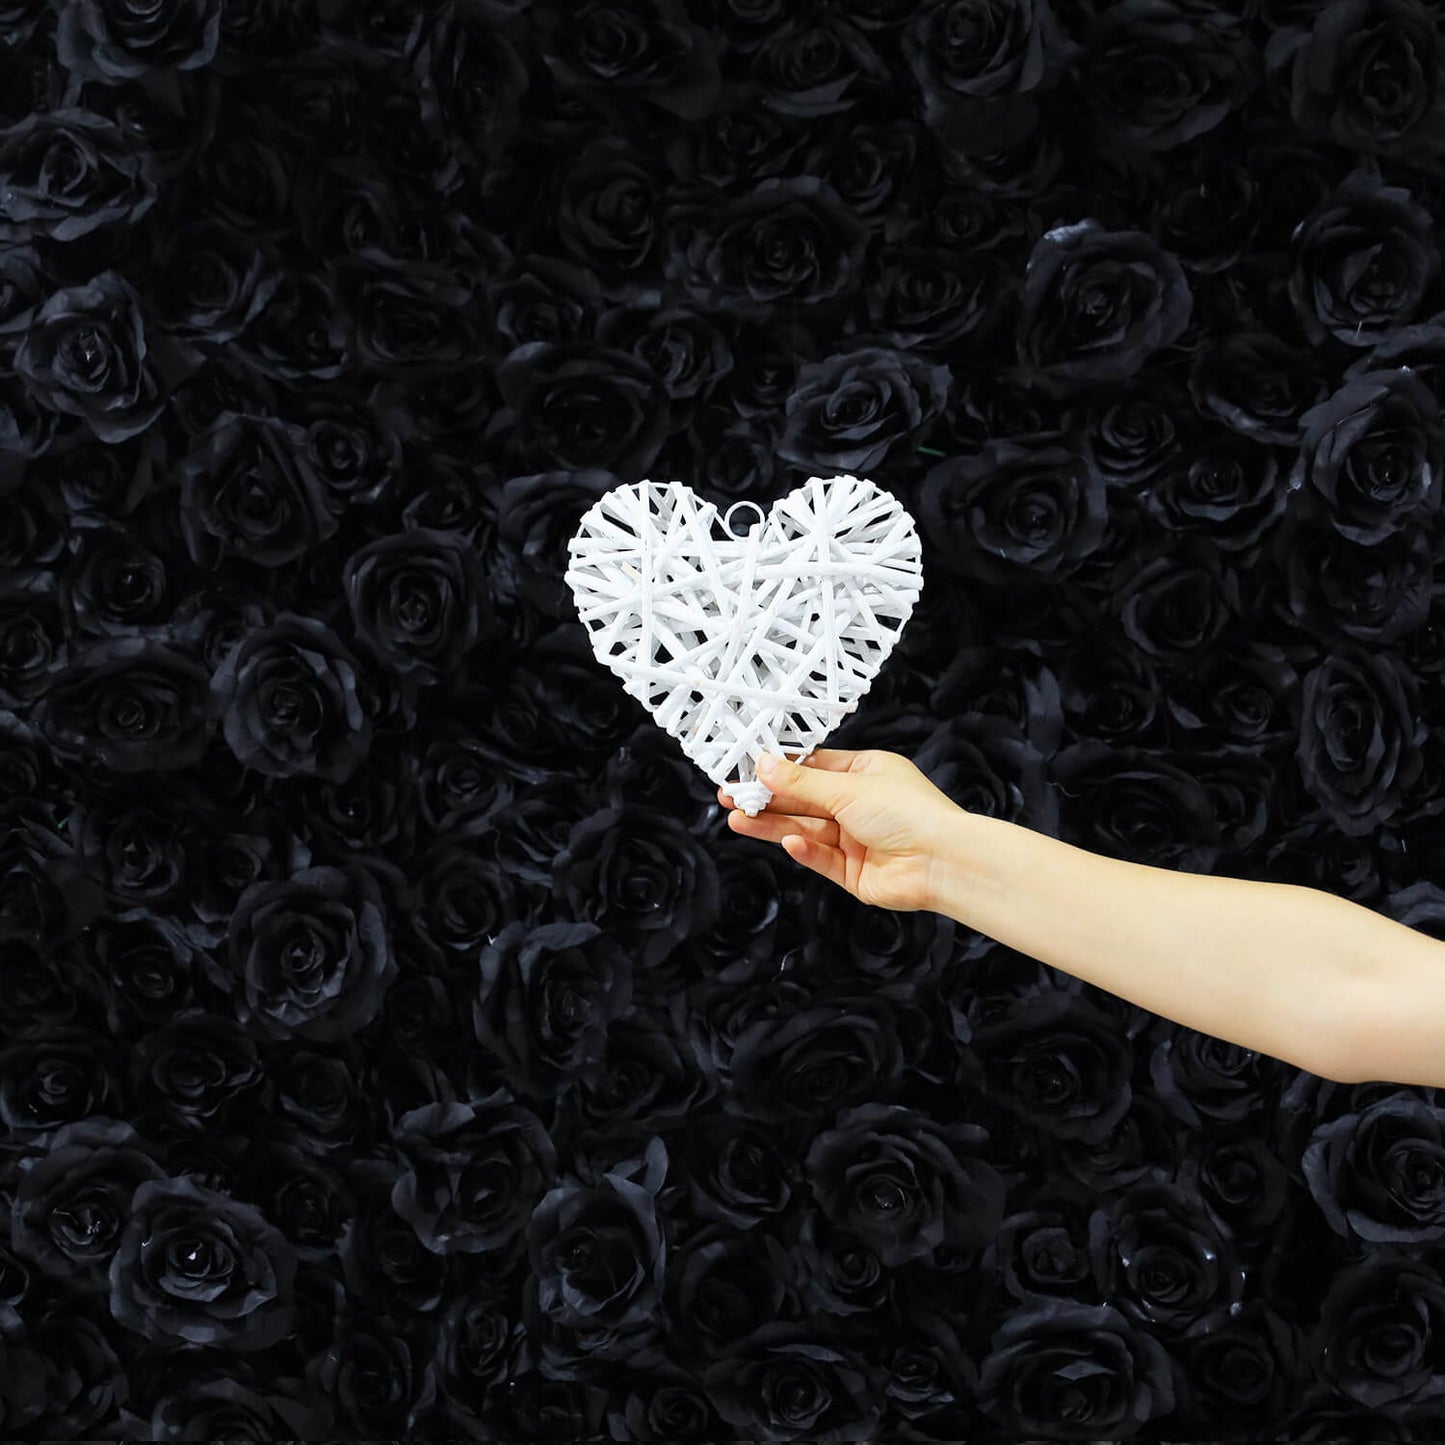 Black Rose Flower Wall Backdrop for Birthday Party Decorations